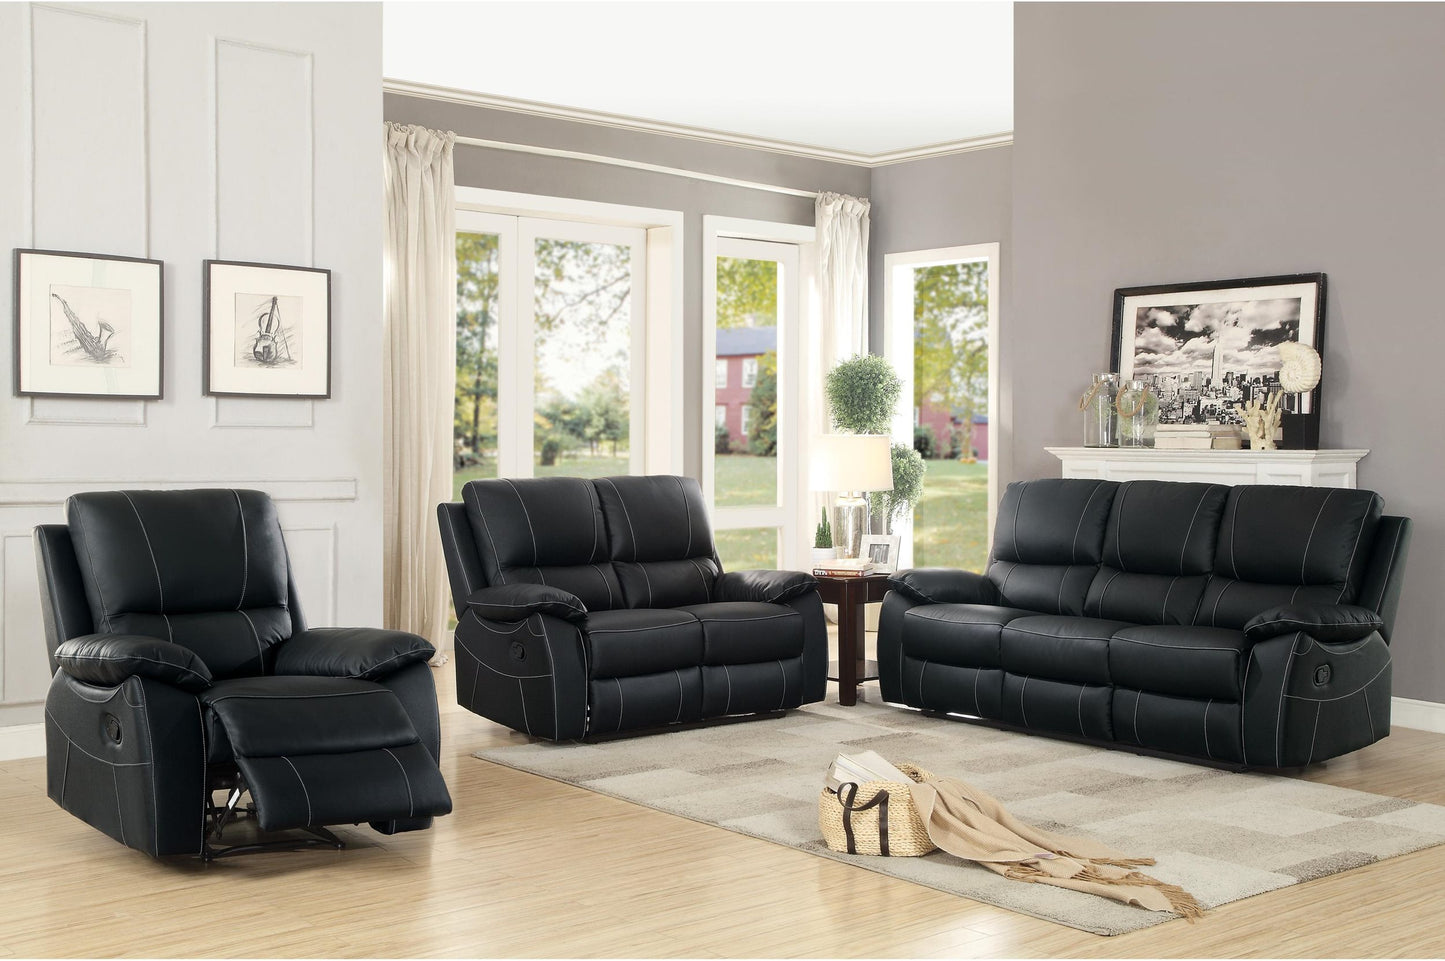 Homelegance Greeley Double Reclining Sofa in Black Leather